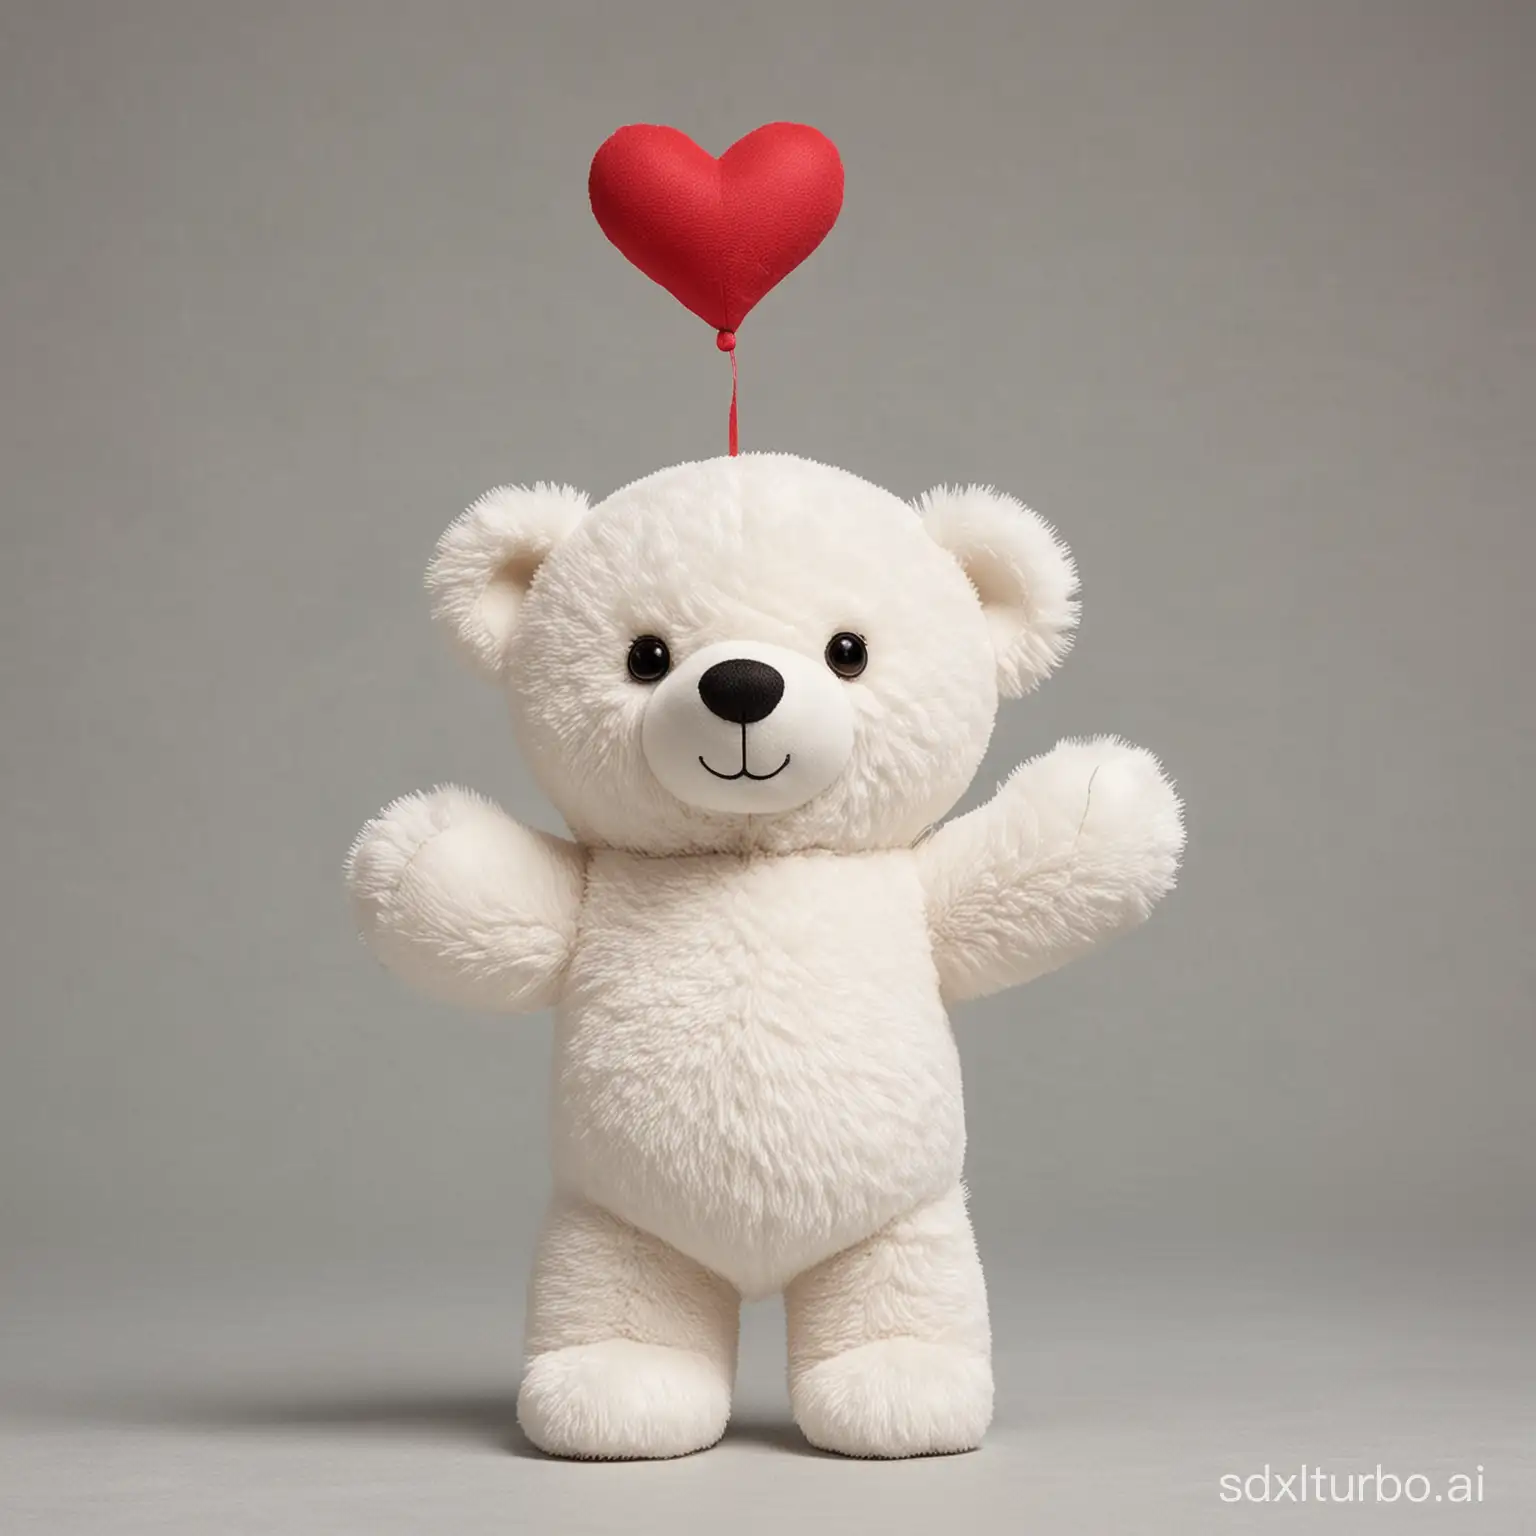  a tall white teddy bear standing, one hand up and curved like a half heart shape
